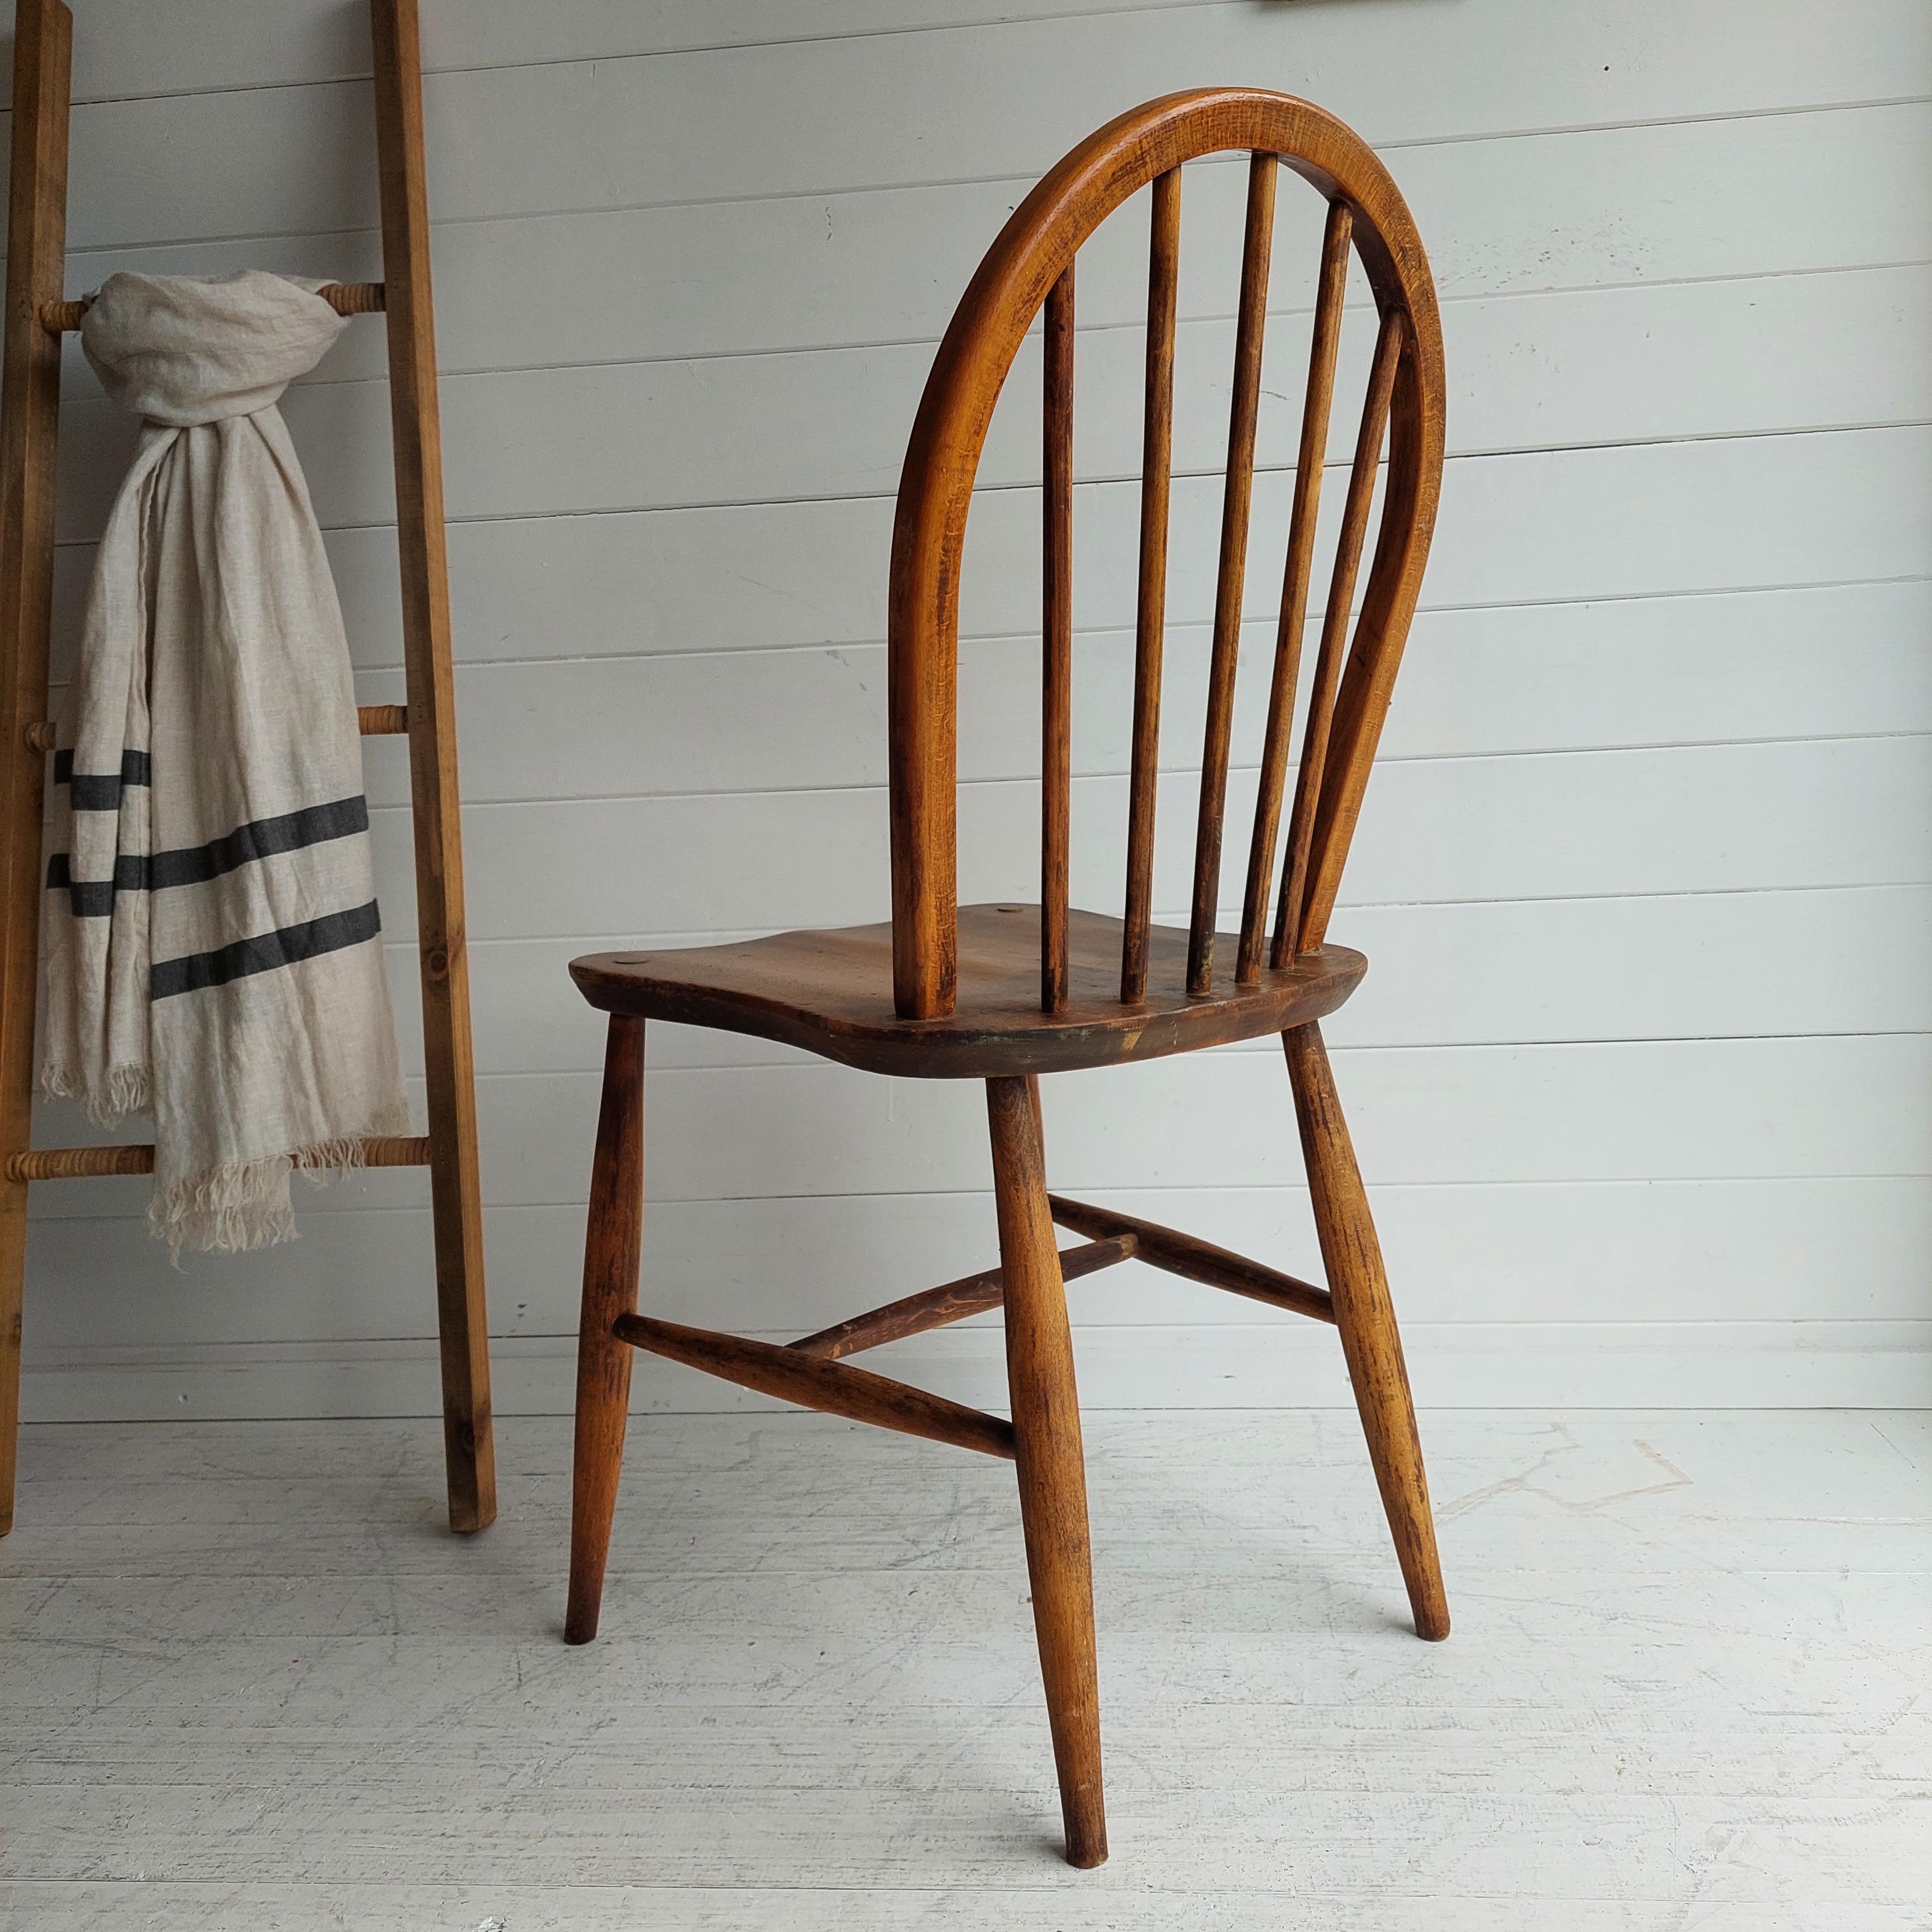 British Midcentury Ercol Windsor Kitchen Chair 'Model No. 4a or No. 100', 50s